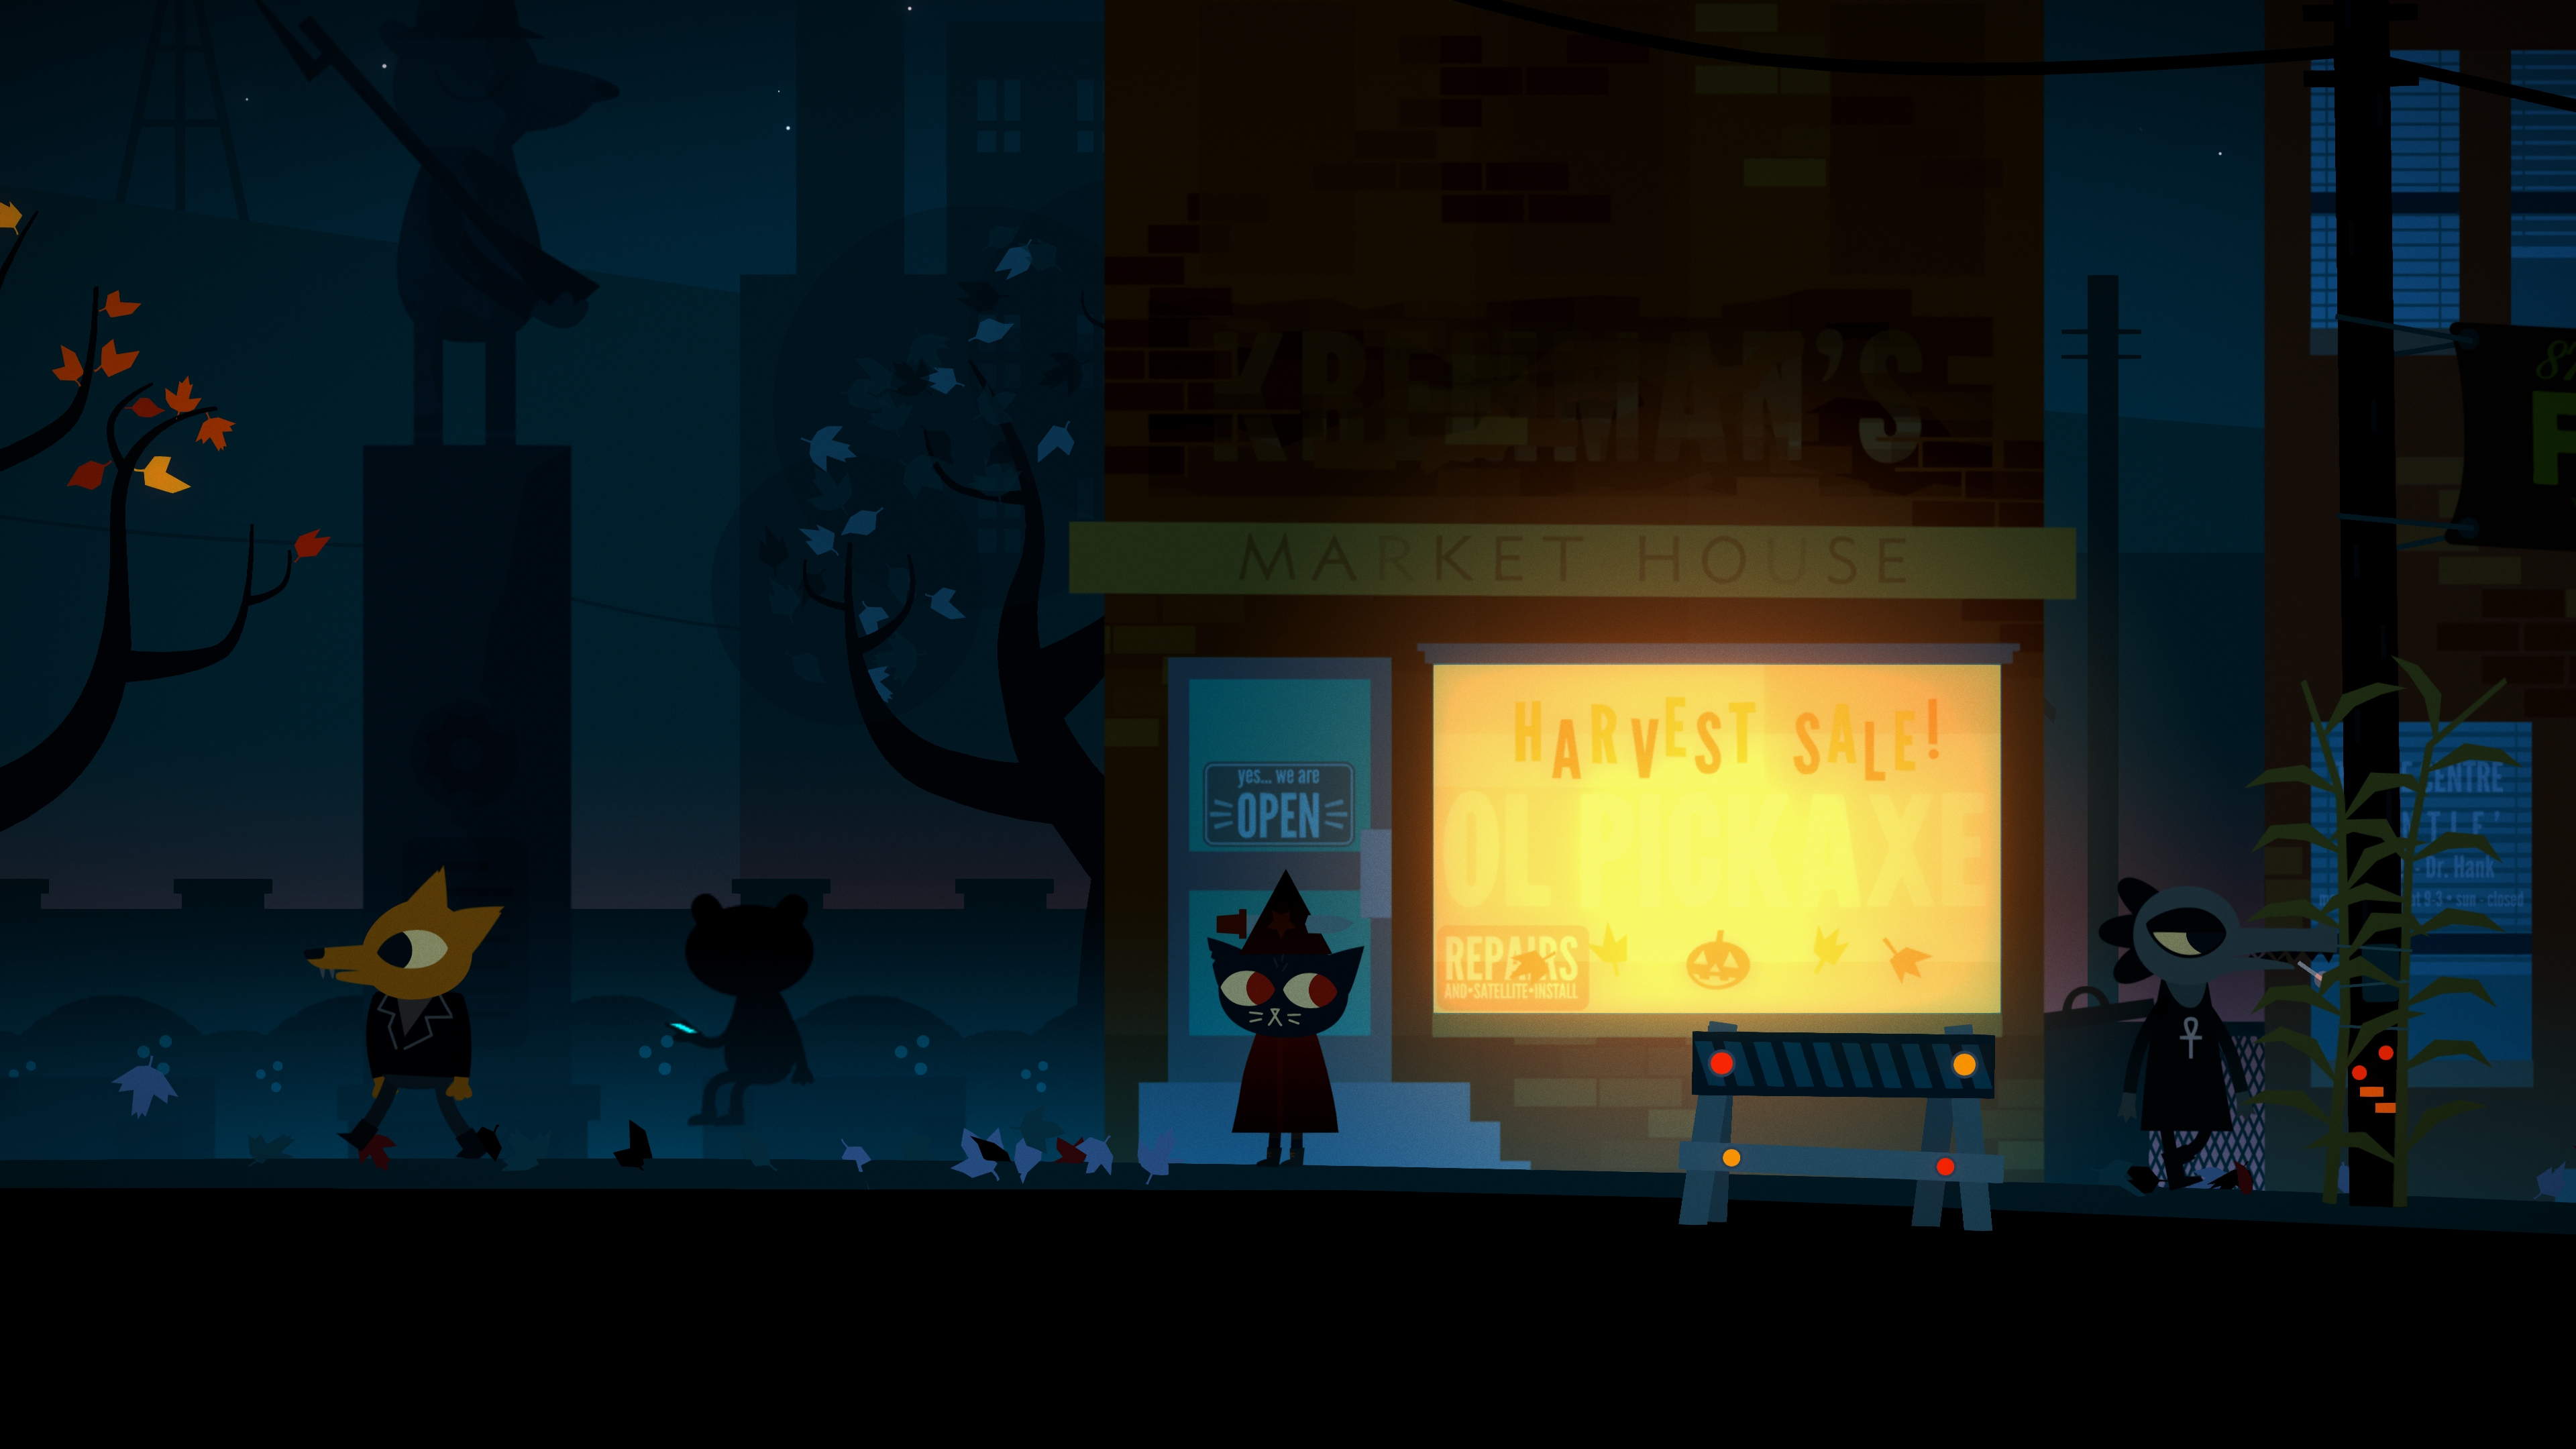 Video Game Night in the Woods HD Wallpaper | Background Image